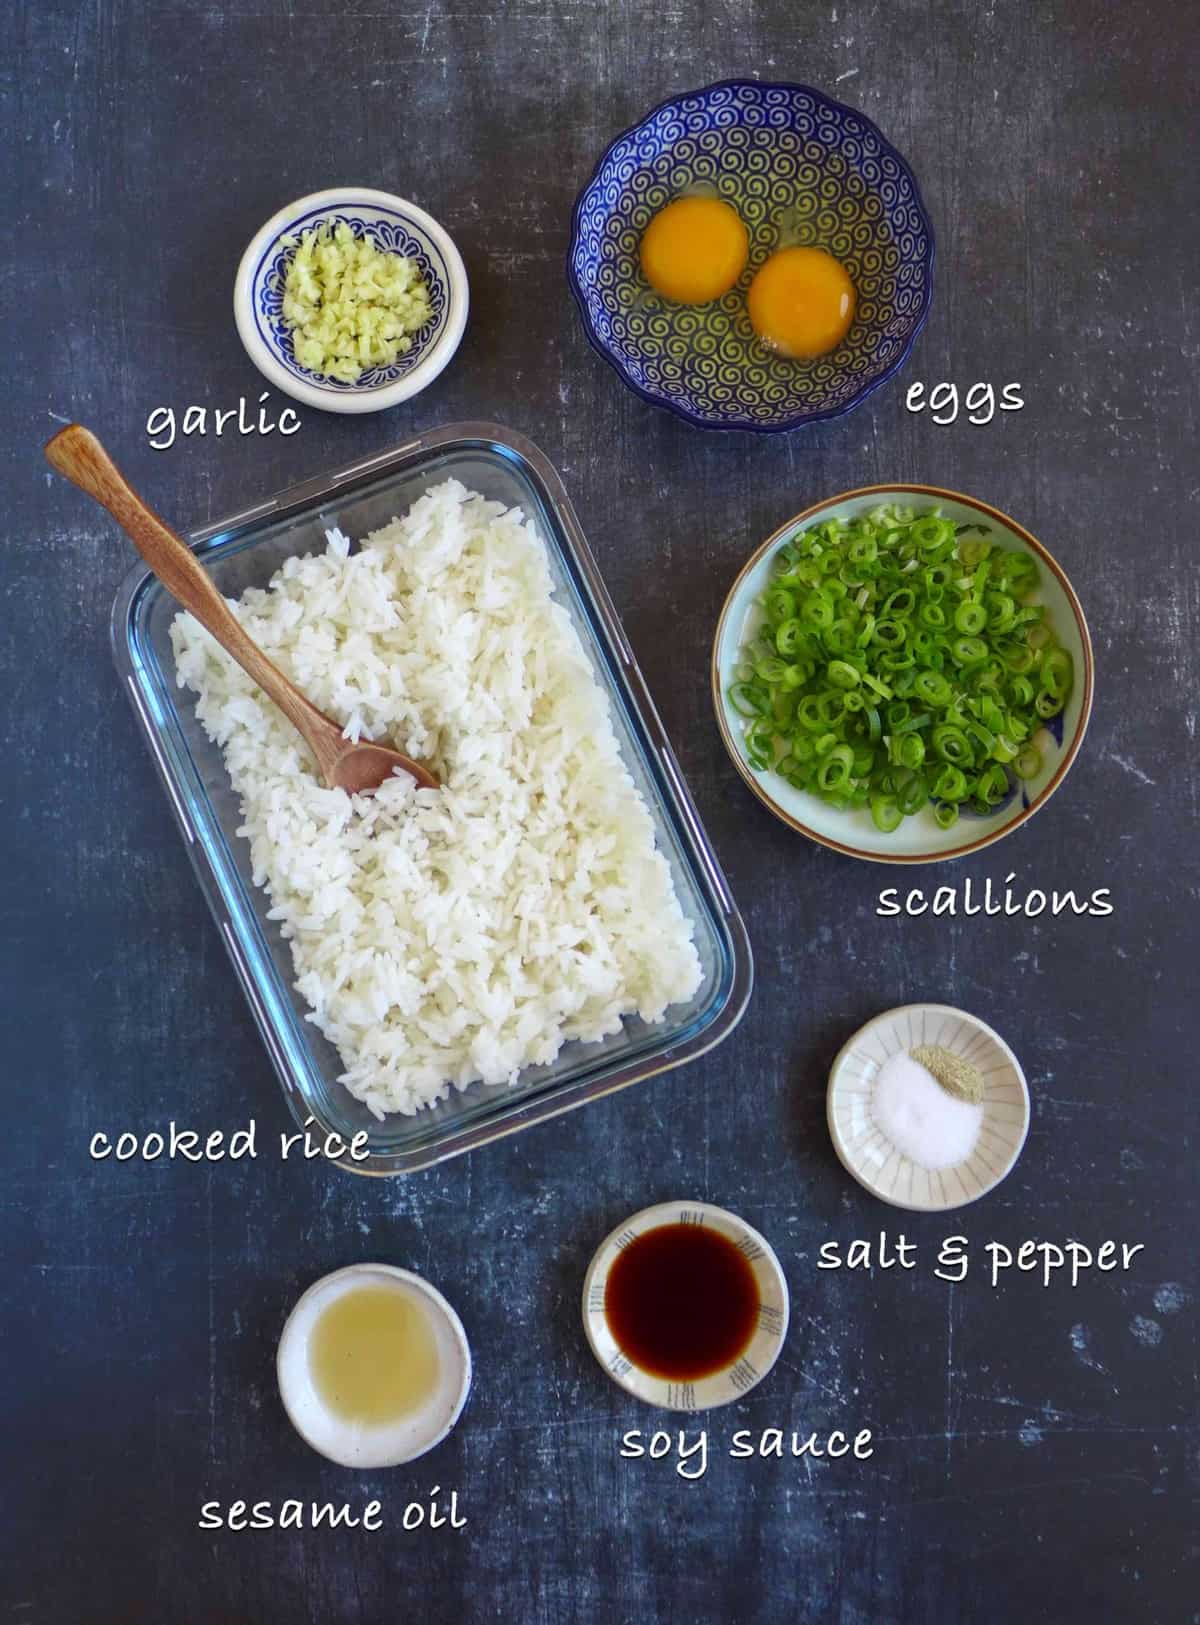 Ingredients for making egg fried rice.